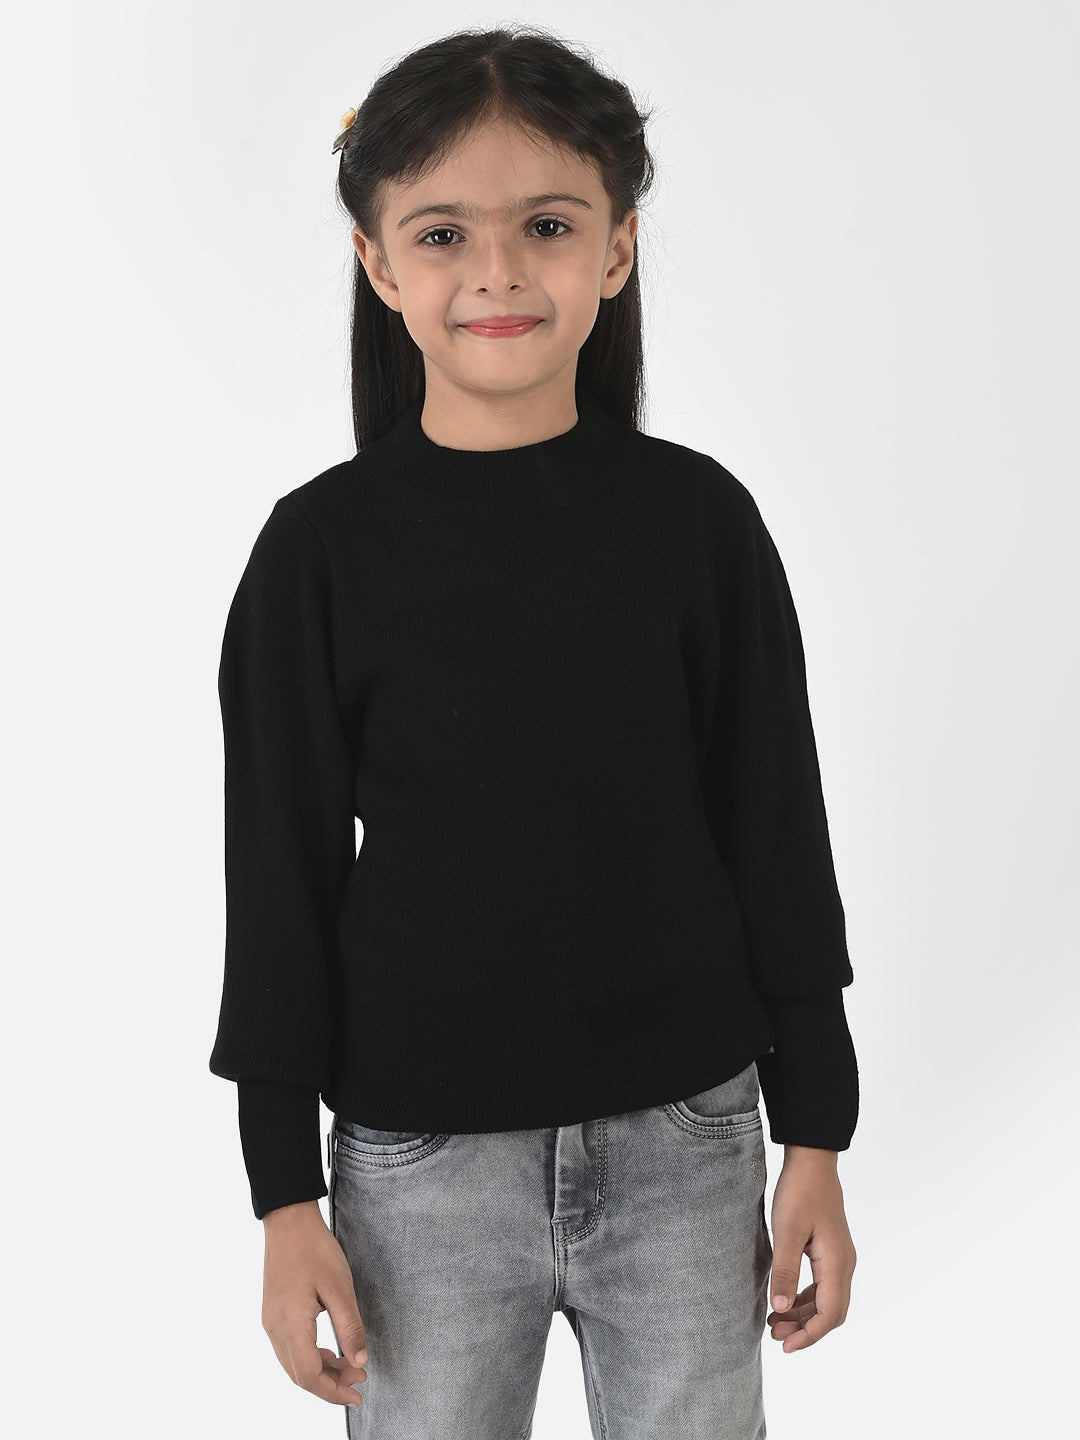 Black Knitwear with Cuffed Sleeves